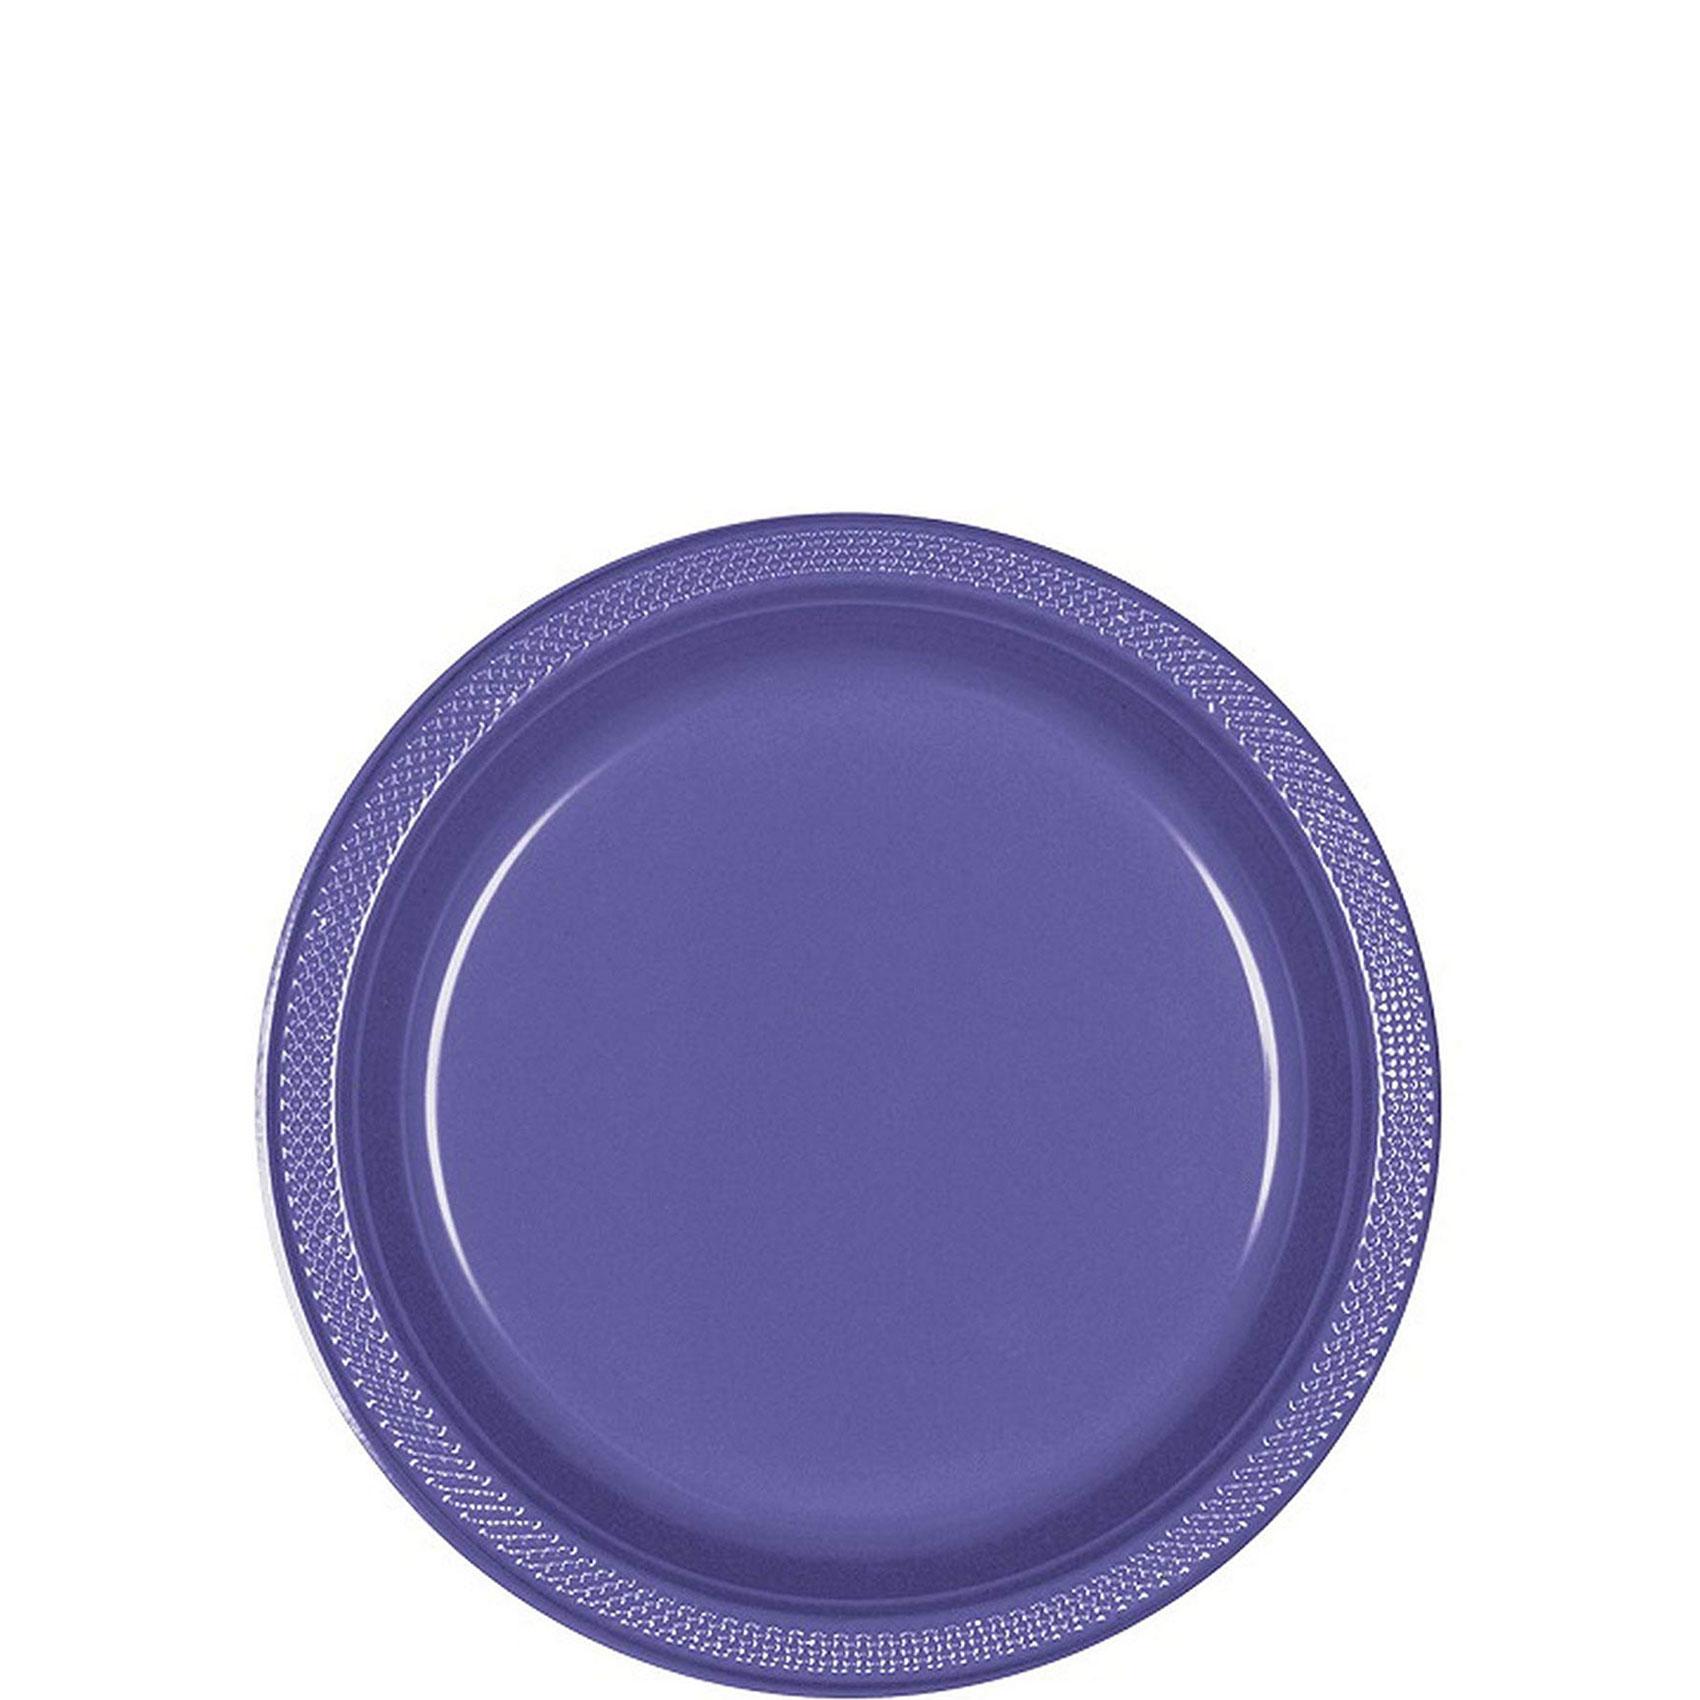 New Purple Dessert Plates 7in, 20pcs Solid Tableware - Party Centre